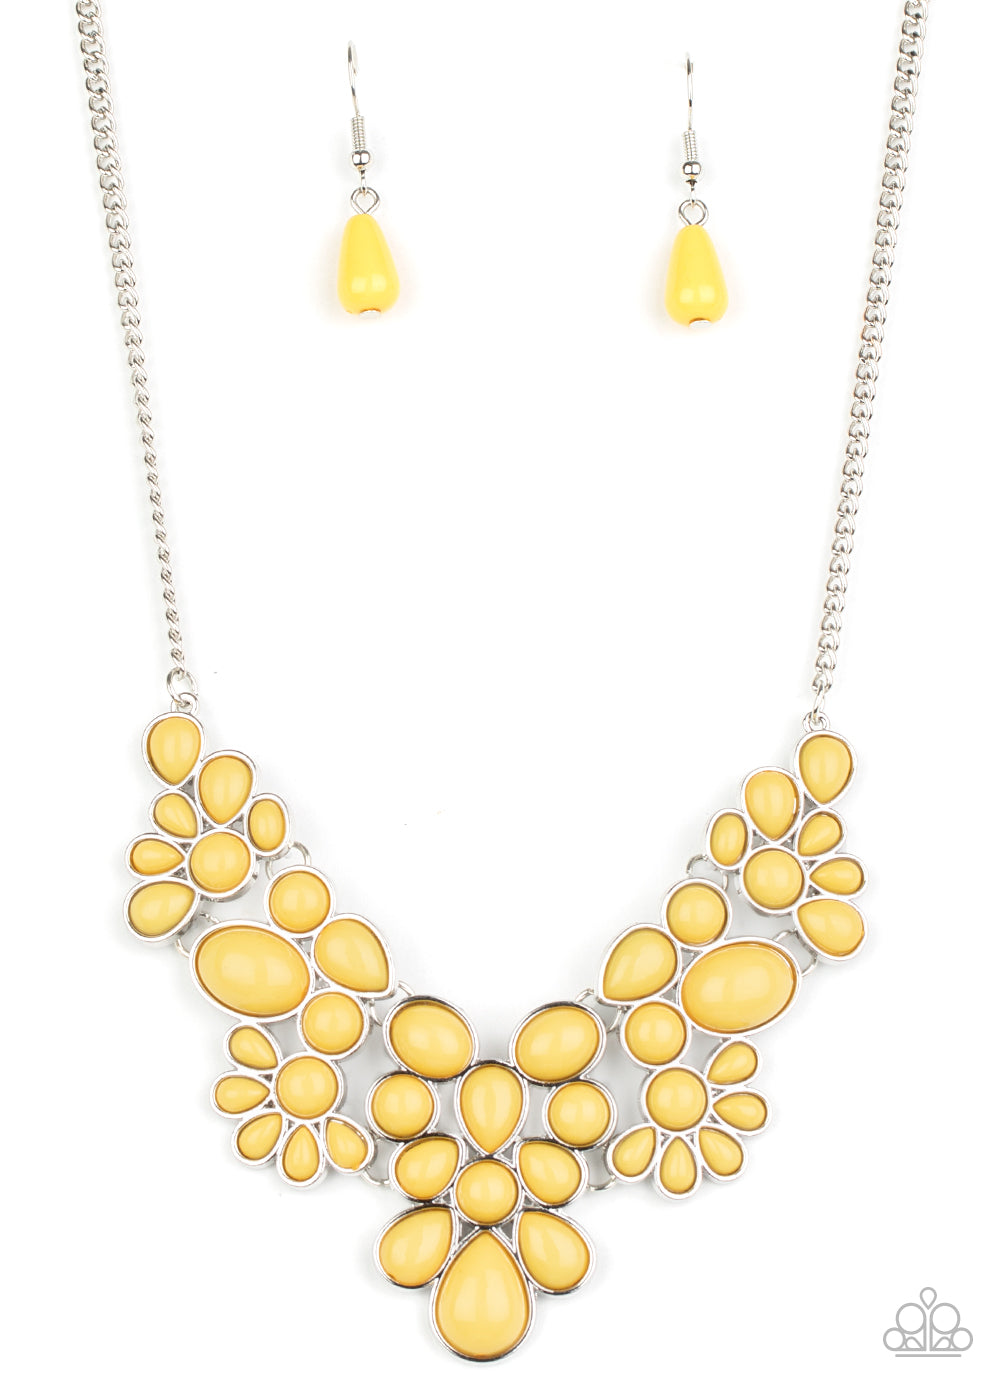 five-dollar-jewelry-bohemian-banquet-yellow-necklace-paparazzi-accessories